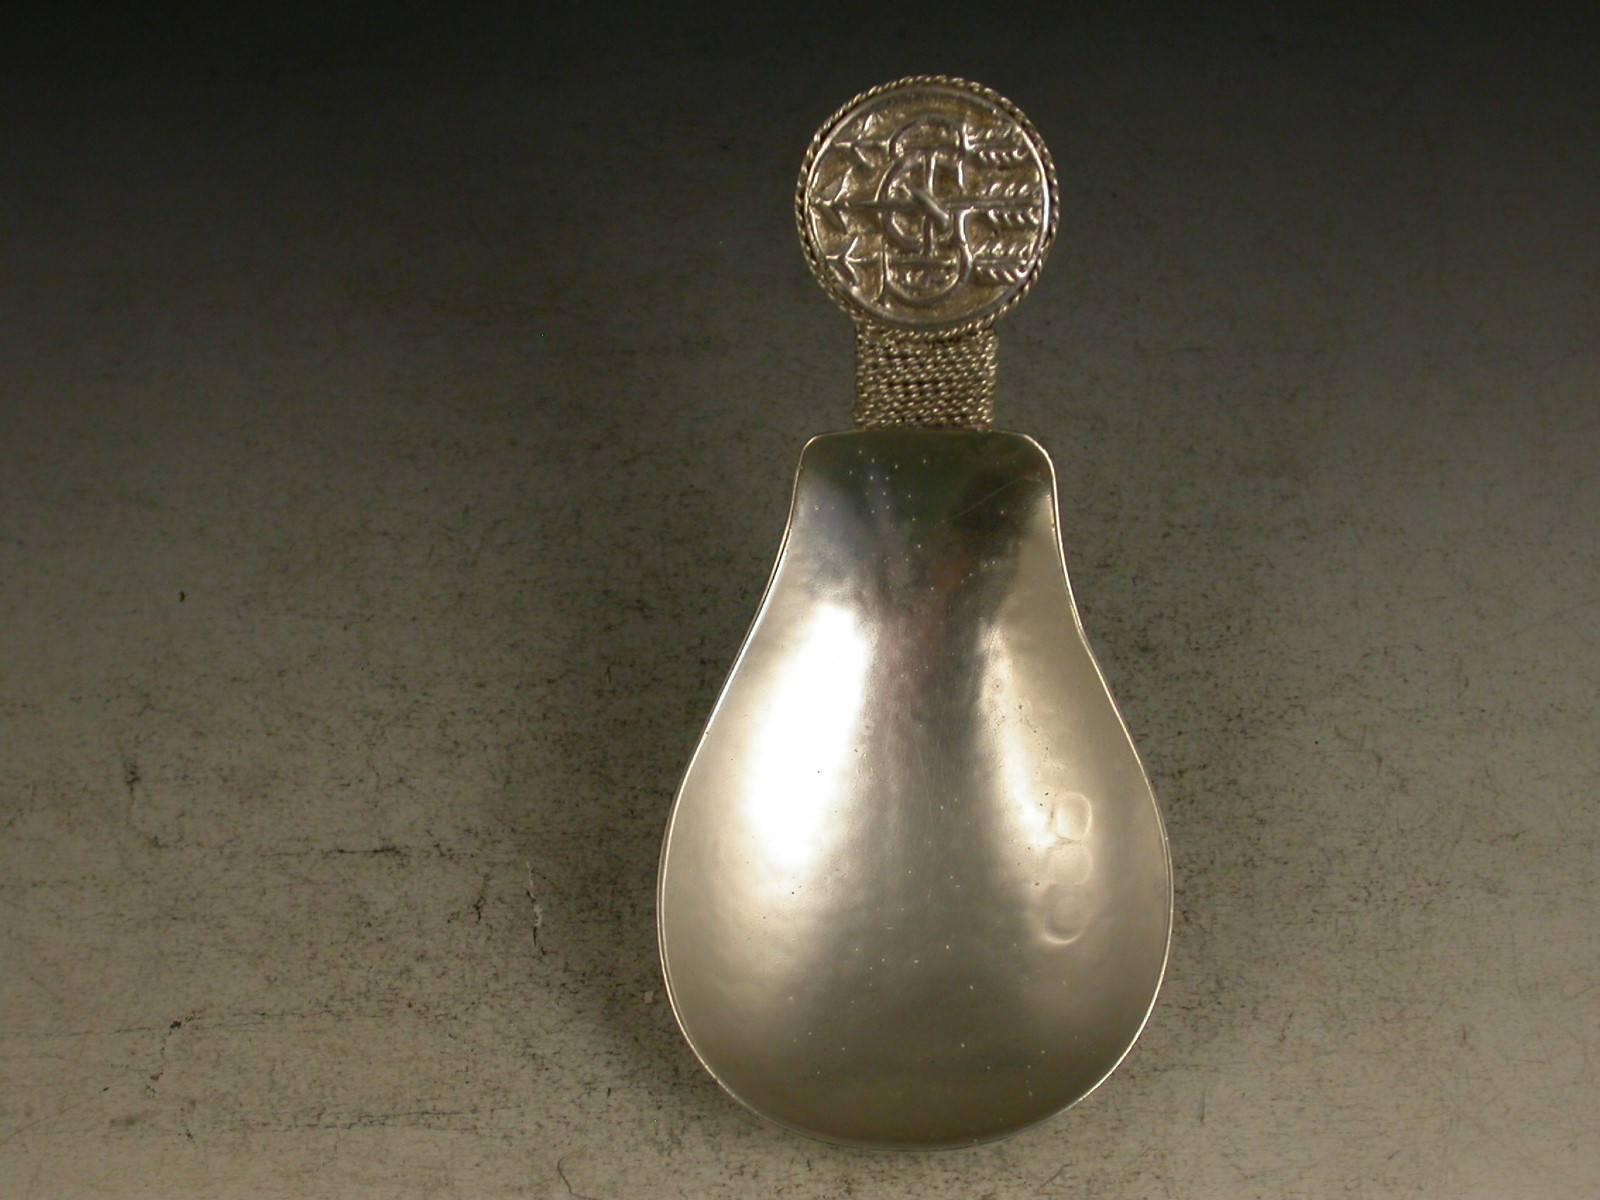 A fine early 20th century 'Arts & Crafts' cast silver caddy spoon with hammered pear shaped bowl, the disc shaped terminal with rope twist border chased with inter-twinned initials 'GS' pierced by three arrows.

Designed by Edward Spencer for the